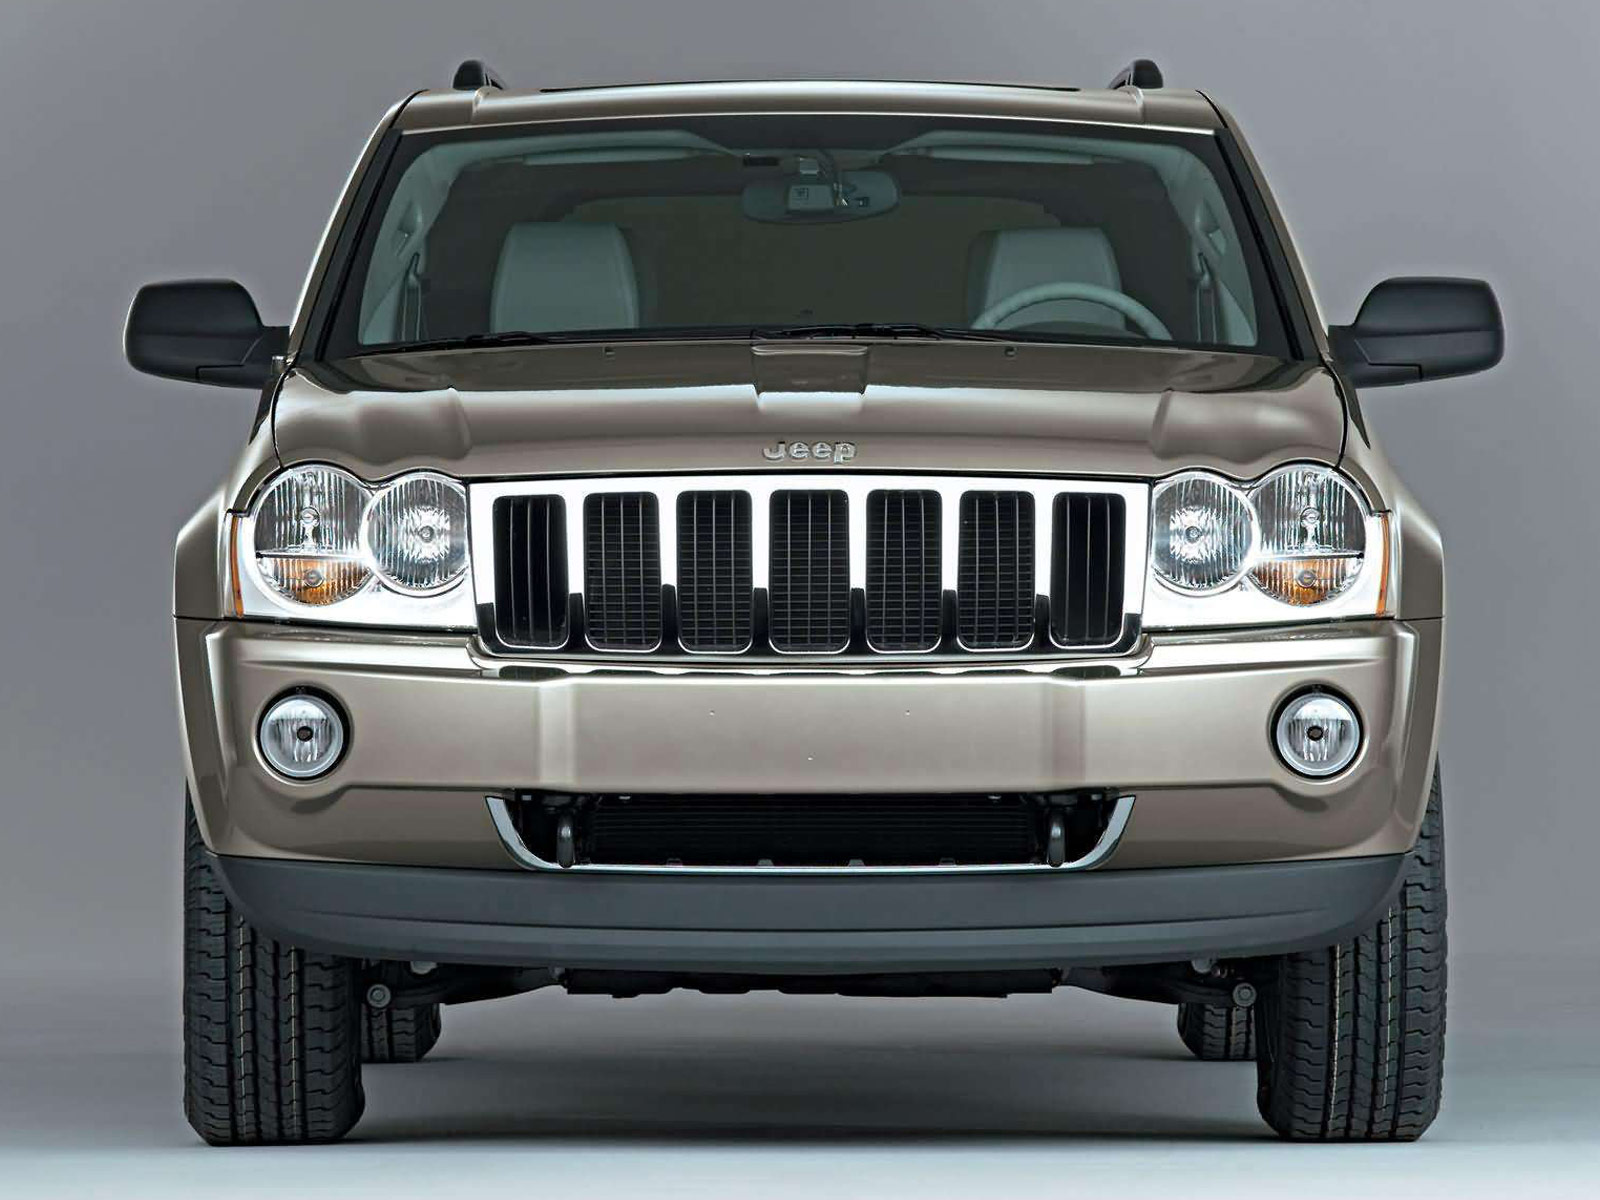 2005 JEEP Grand Cherokee 5 7 Limited